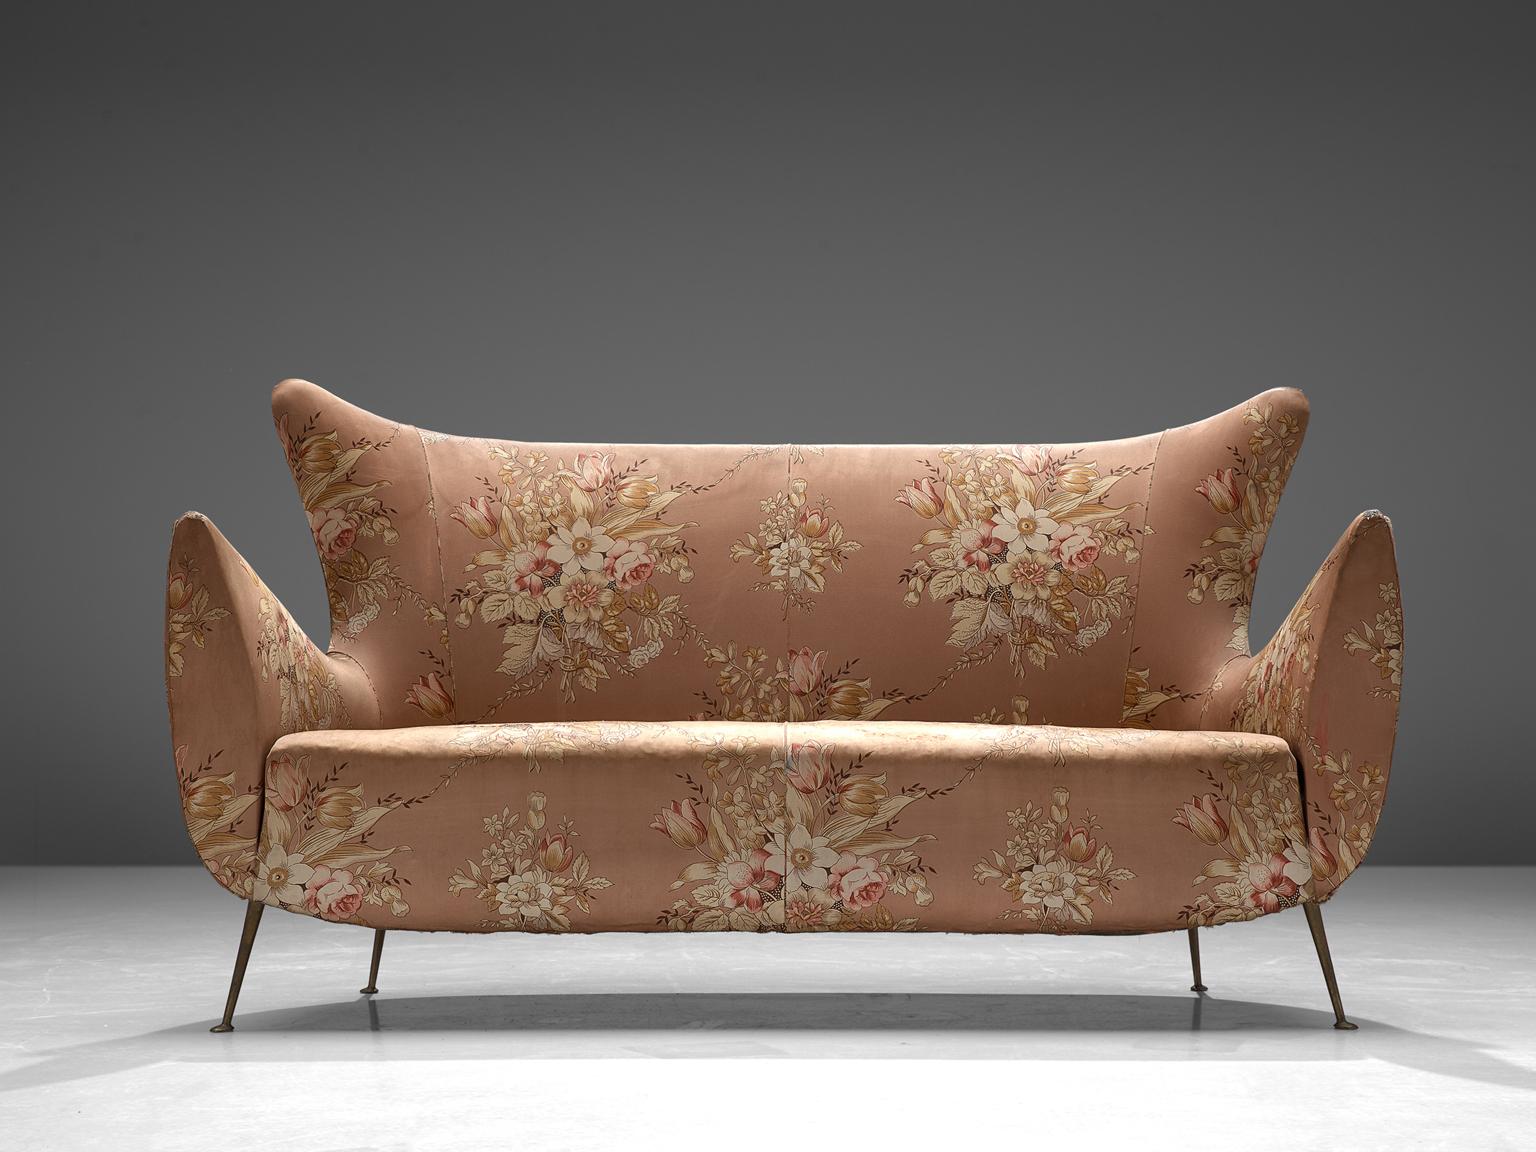 Italian sofa, fabric and metal, Italy, 1950s.

This sofa is an iconic example of Italian design from the 1950s. Organic and sculptural, this two-seat sofa is anything but minimalistic. Equipped with the original stiletto brass feet which are narrow